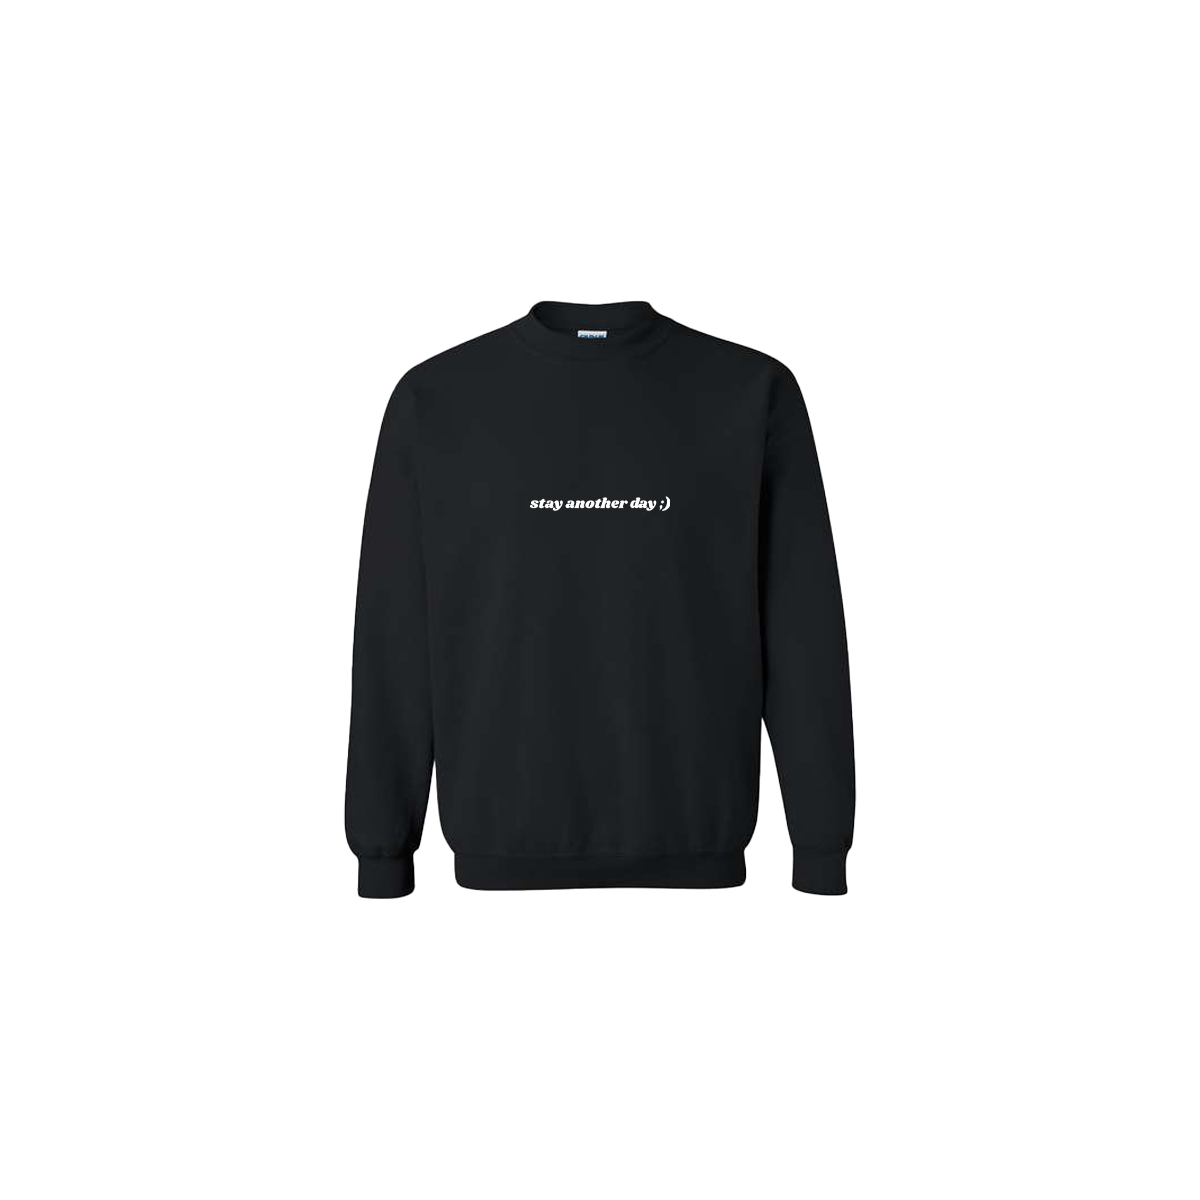 Stay Another Day Embroidered Black Crewneck - Mental Health Awareness Clothing